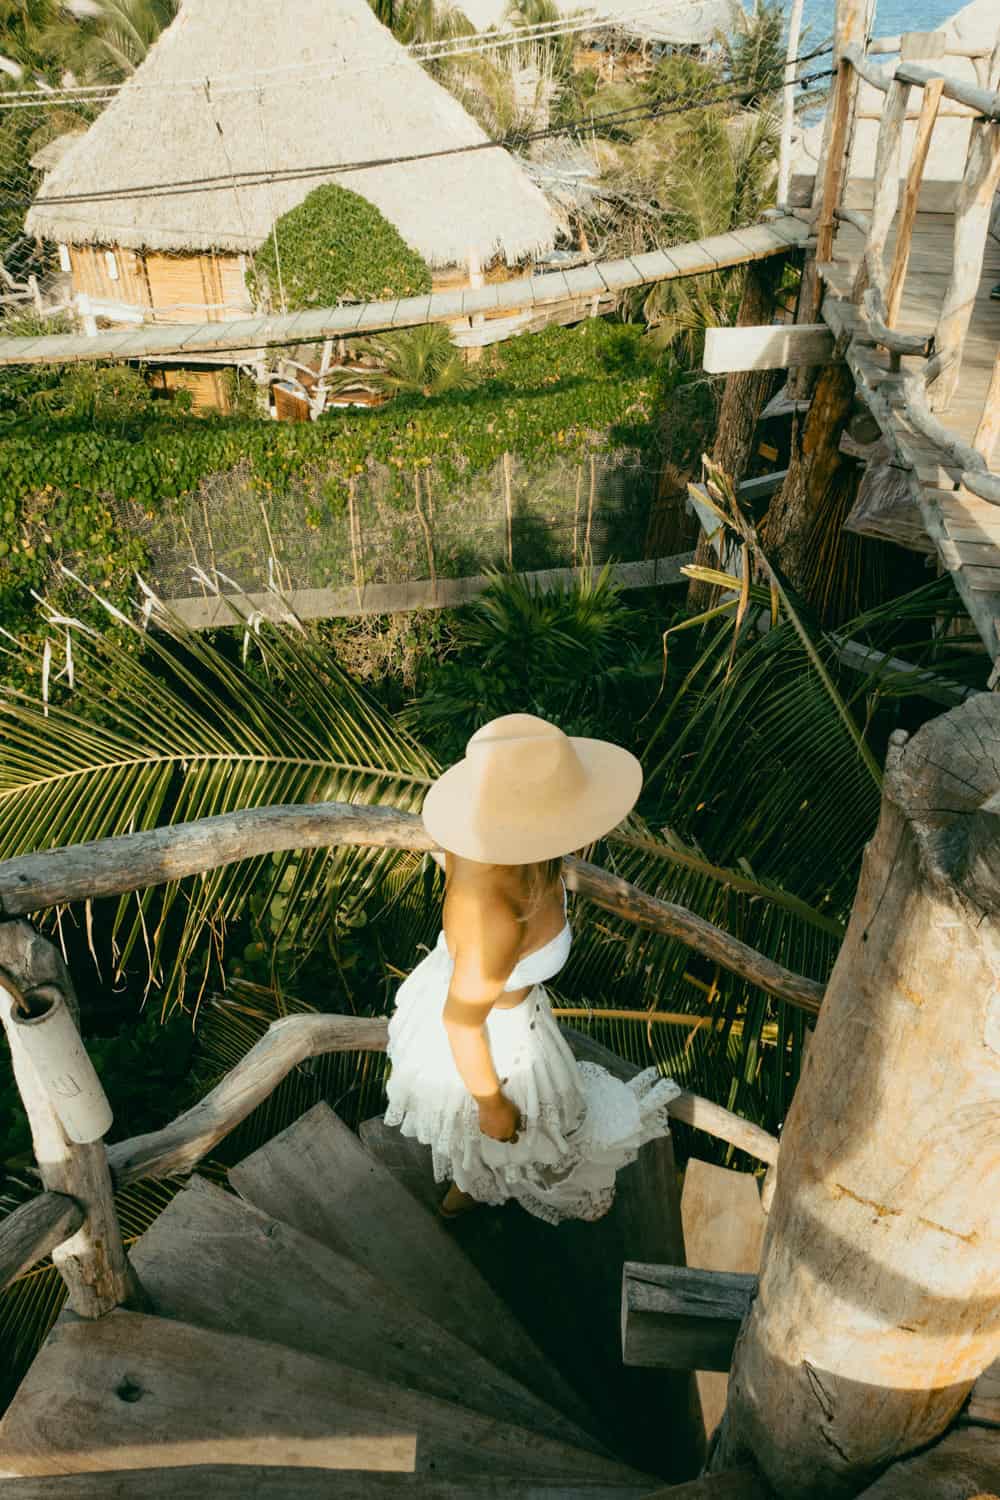 Coco Tran — Aesthetic Travel Blog By Film Photographer Coco Tran https://cocotran.com/how-traveling-changes-you/